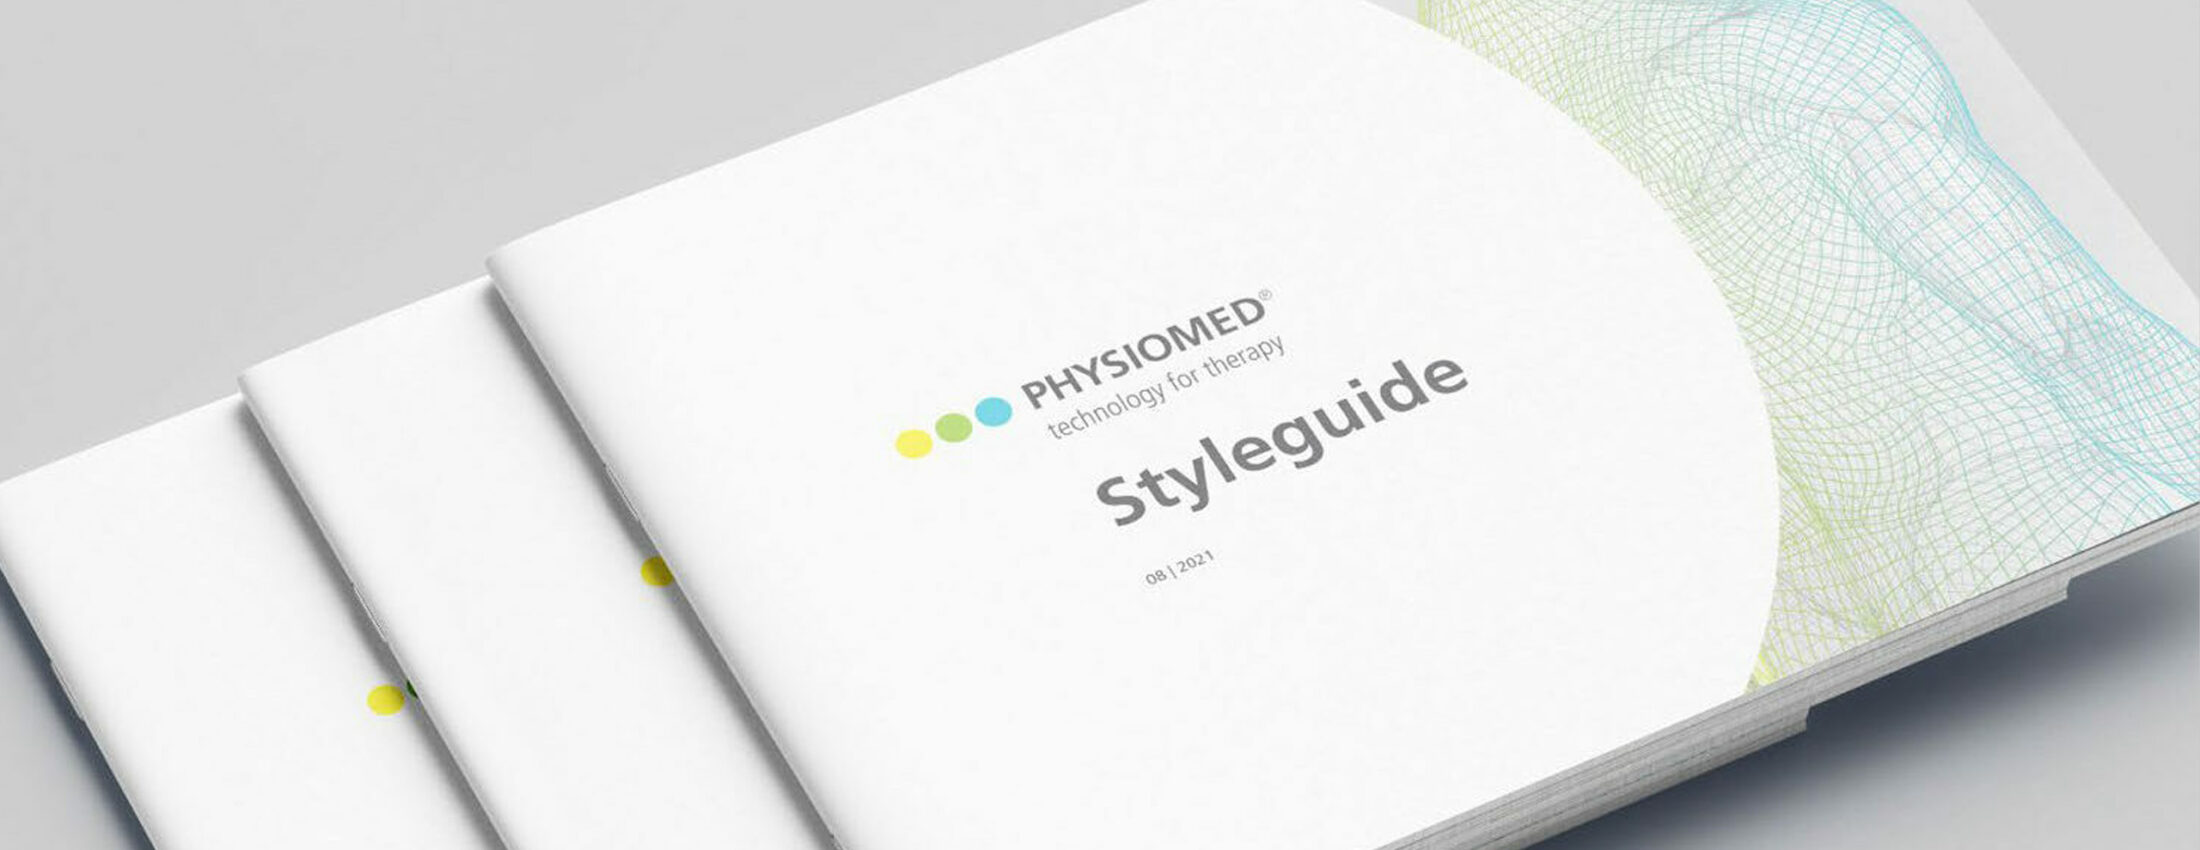 PHYSIOMED Styleguide_Mockup_9